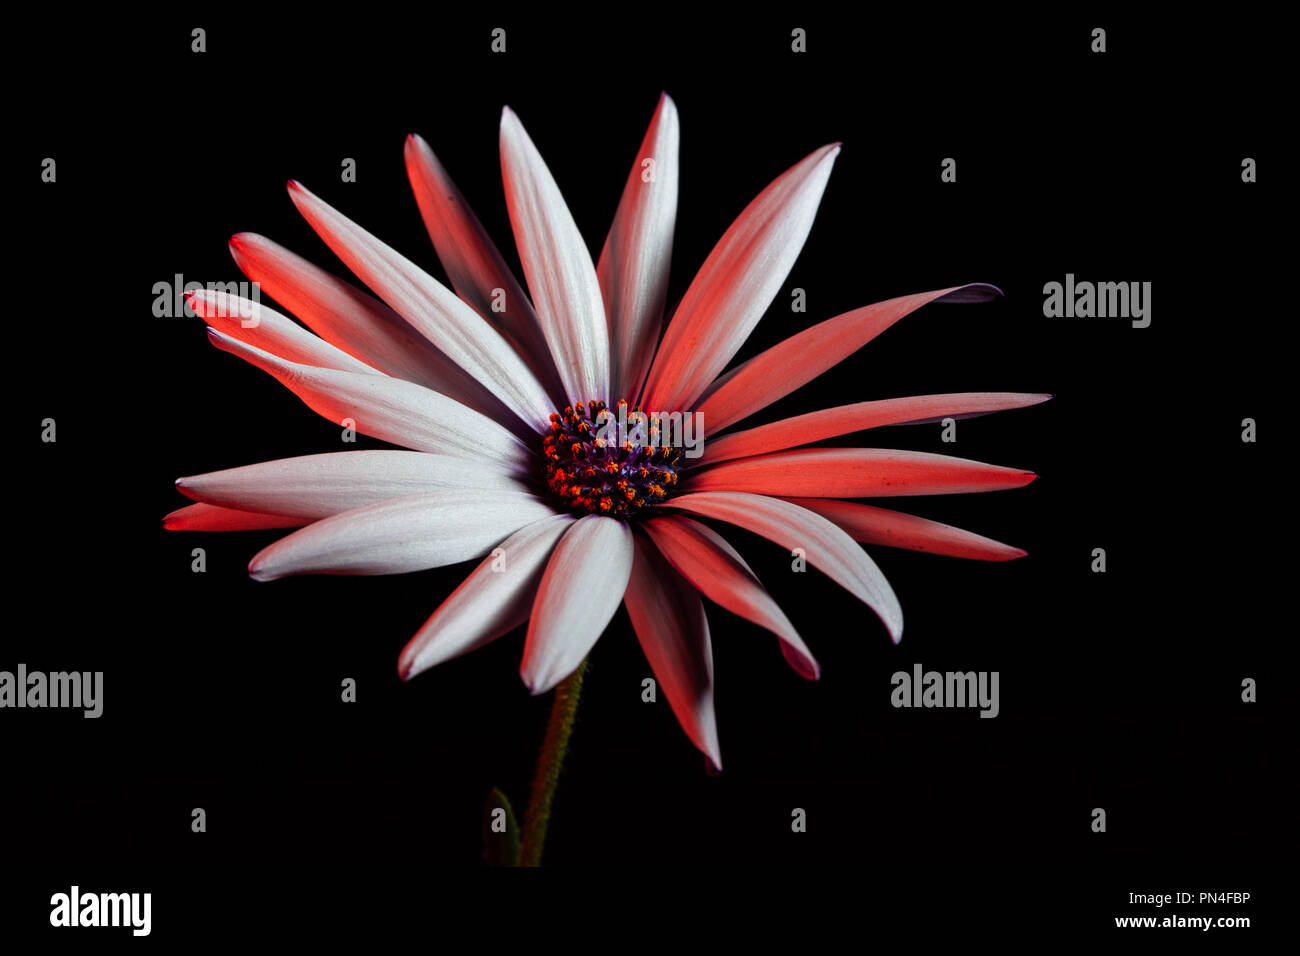 African daisy glowing in red light on black background Stock Photo